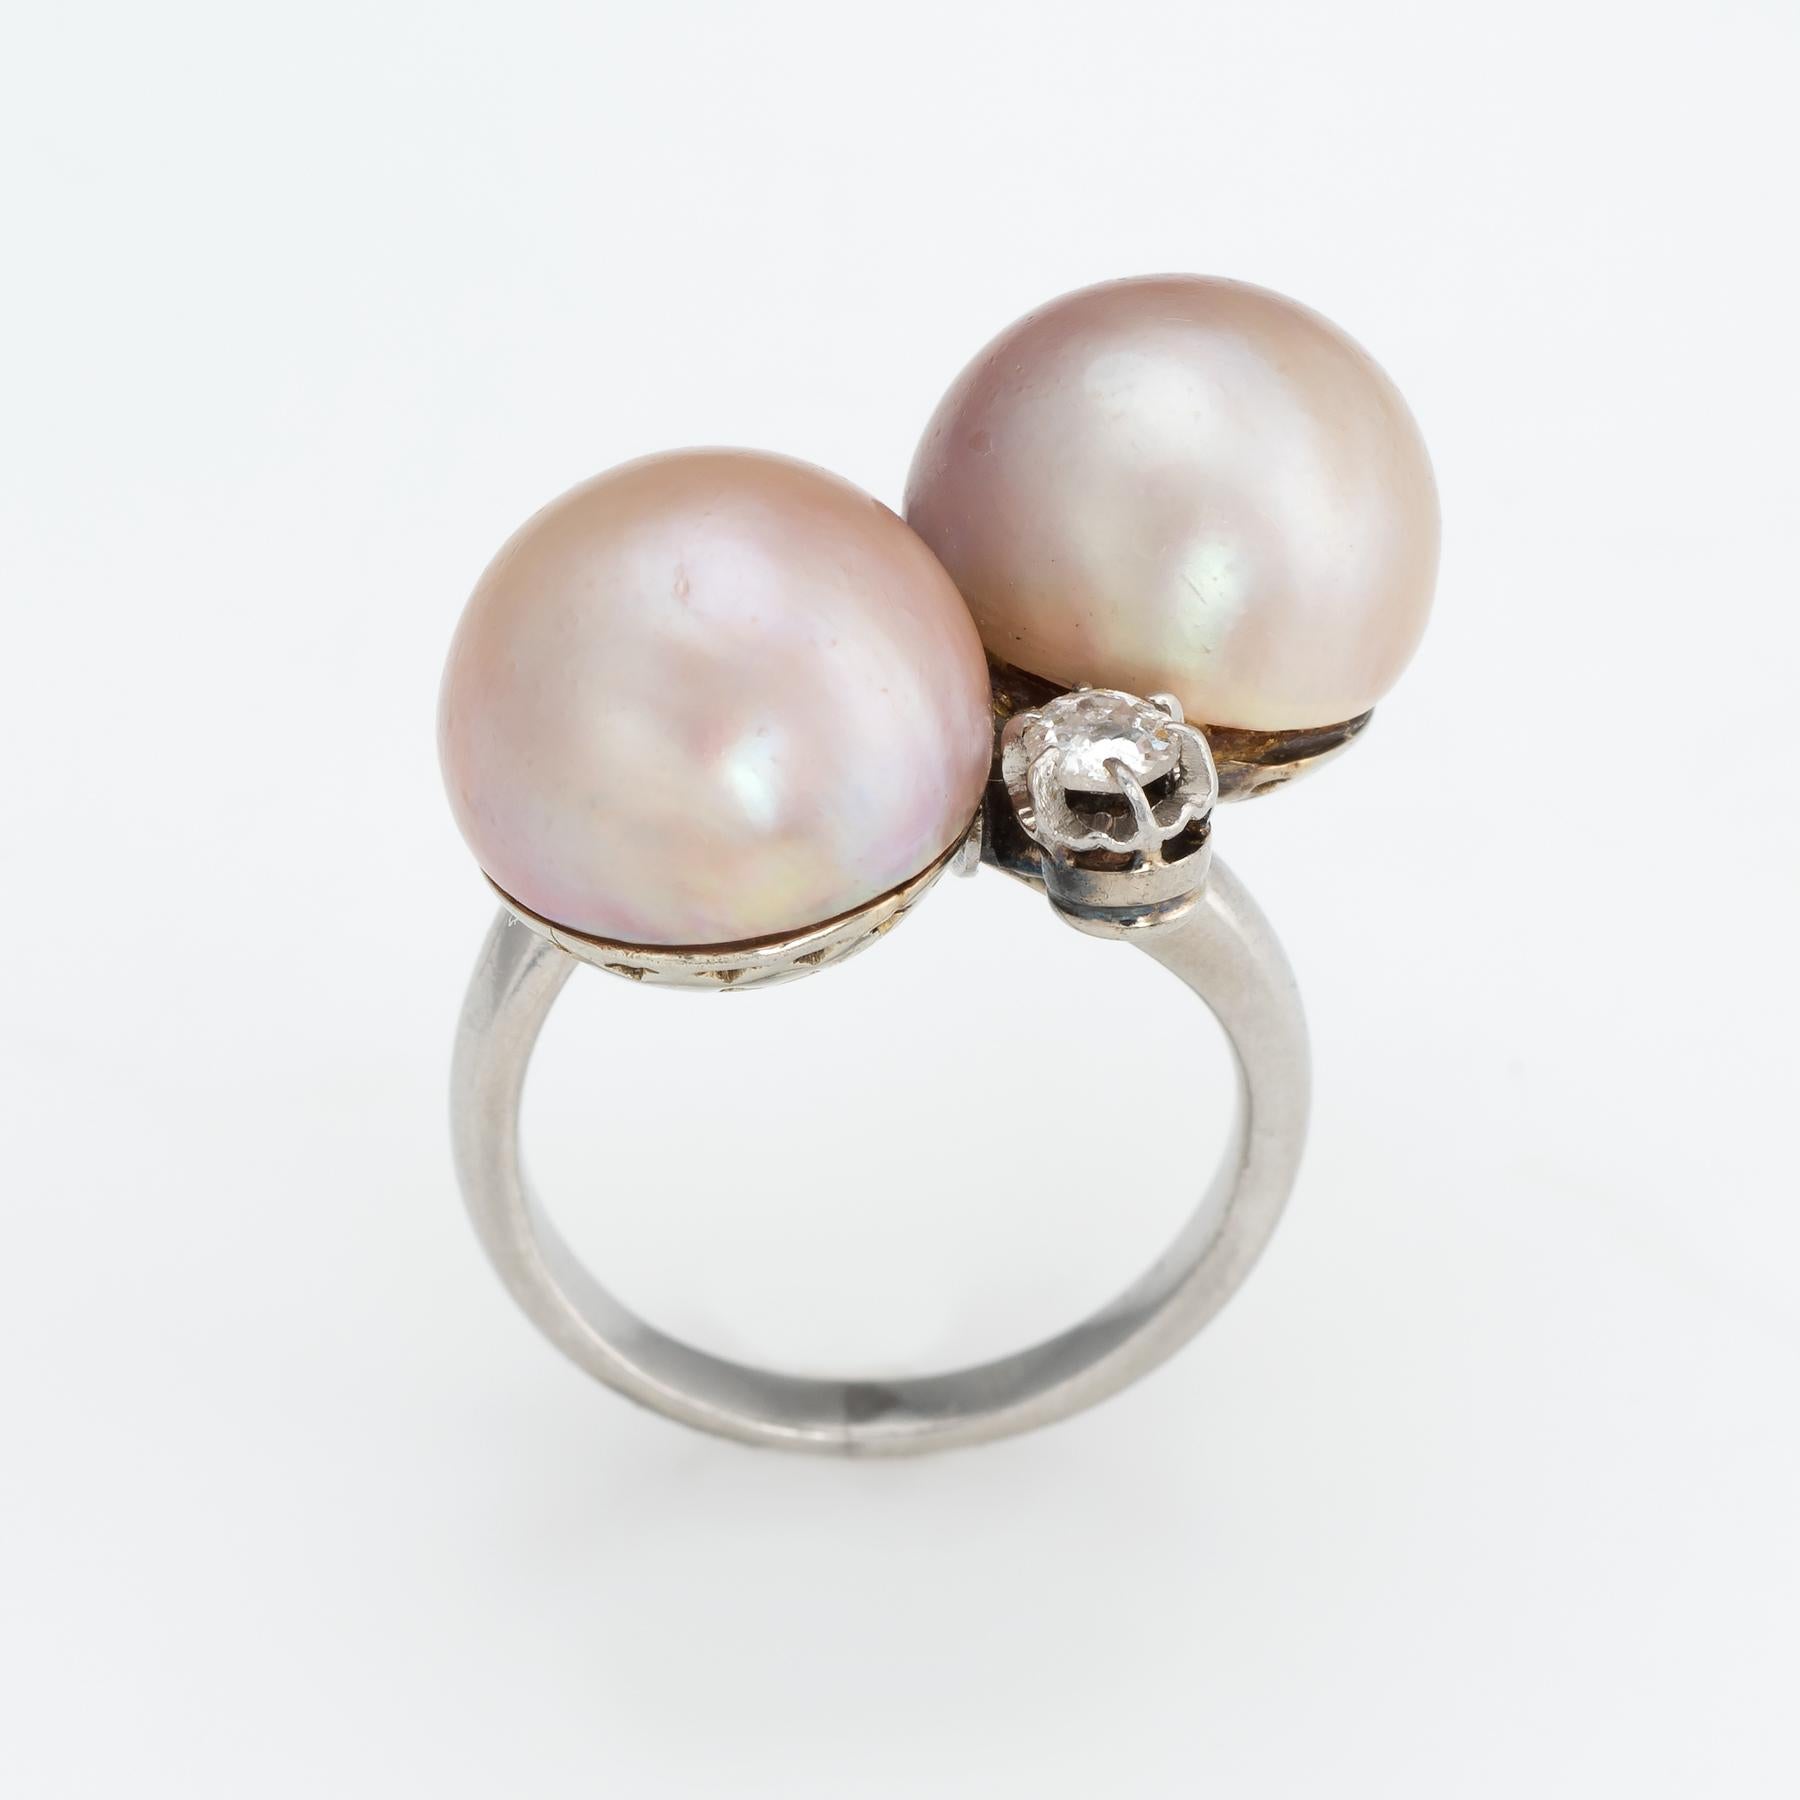 Finely detailed vintage Art Deco cultured pearl & diamond ring (circa 1920s to 1930s), crafted in 900 platinum. 

Cultured pearls each measure 12mm, accented with two estimated 0.15 carat old mine cut diamonds. The total diamond weight is estimated